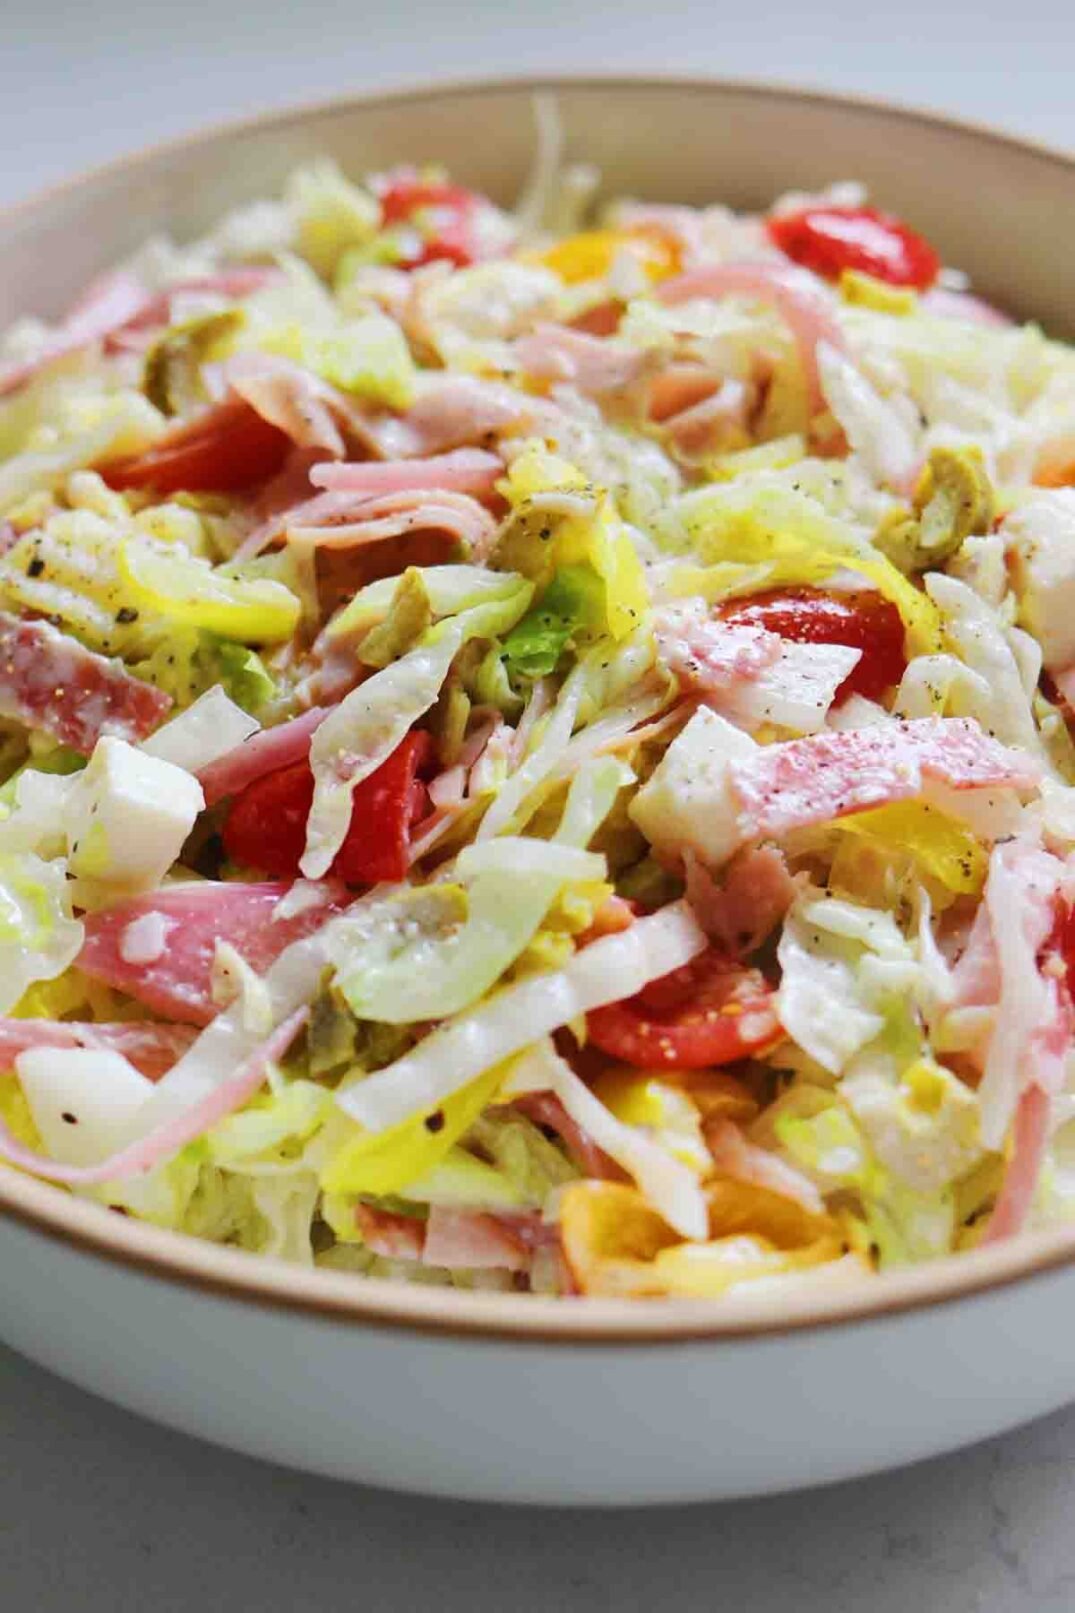 an angled view of a colorful chopped grinder salad.